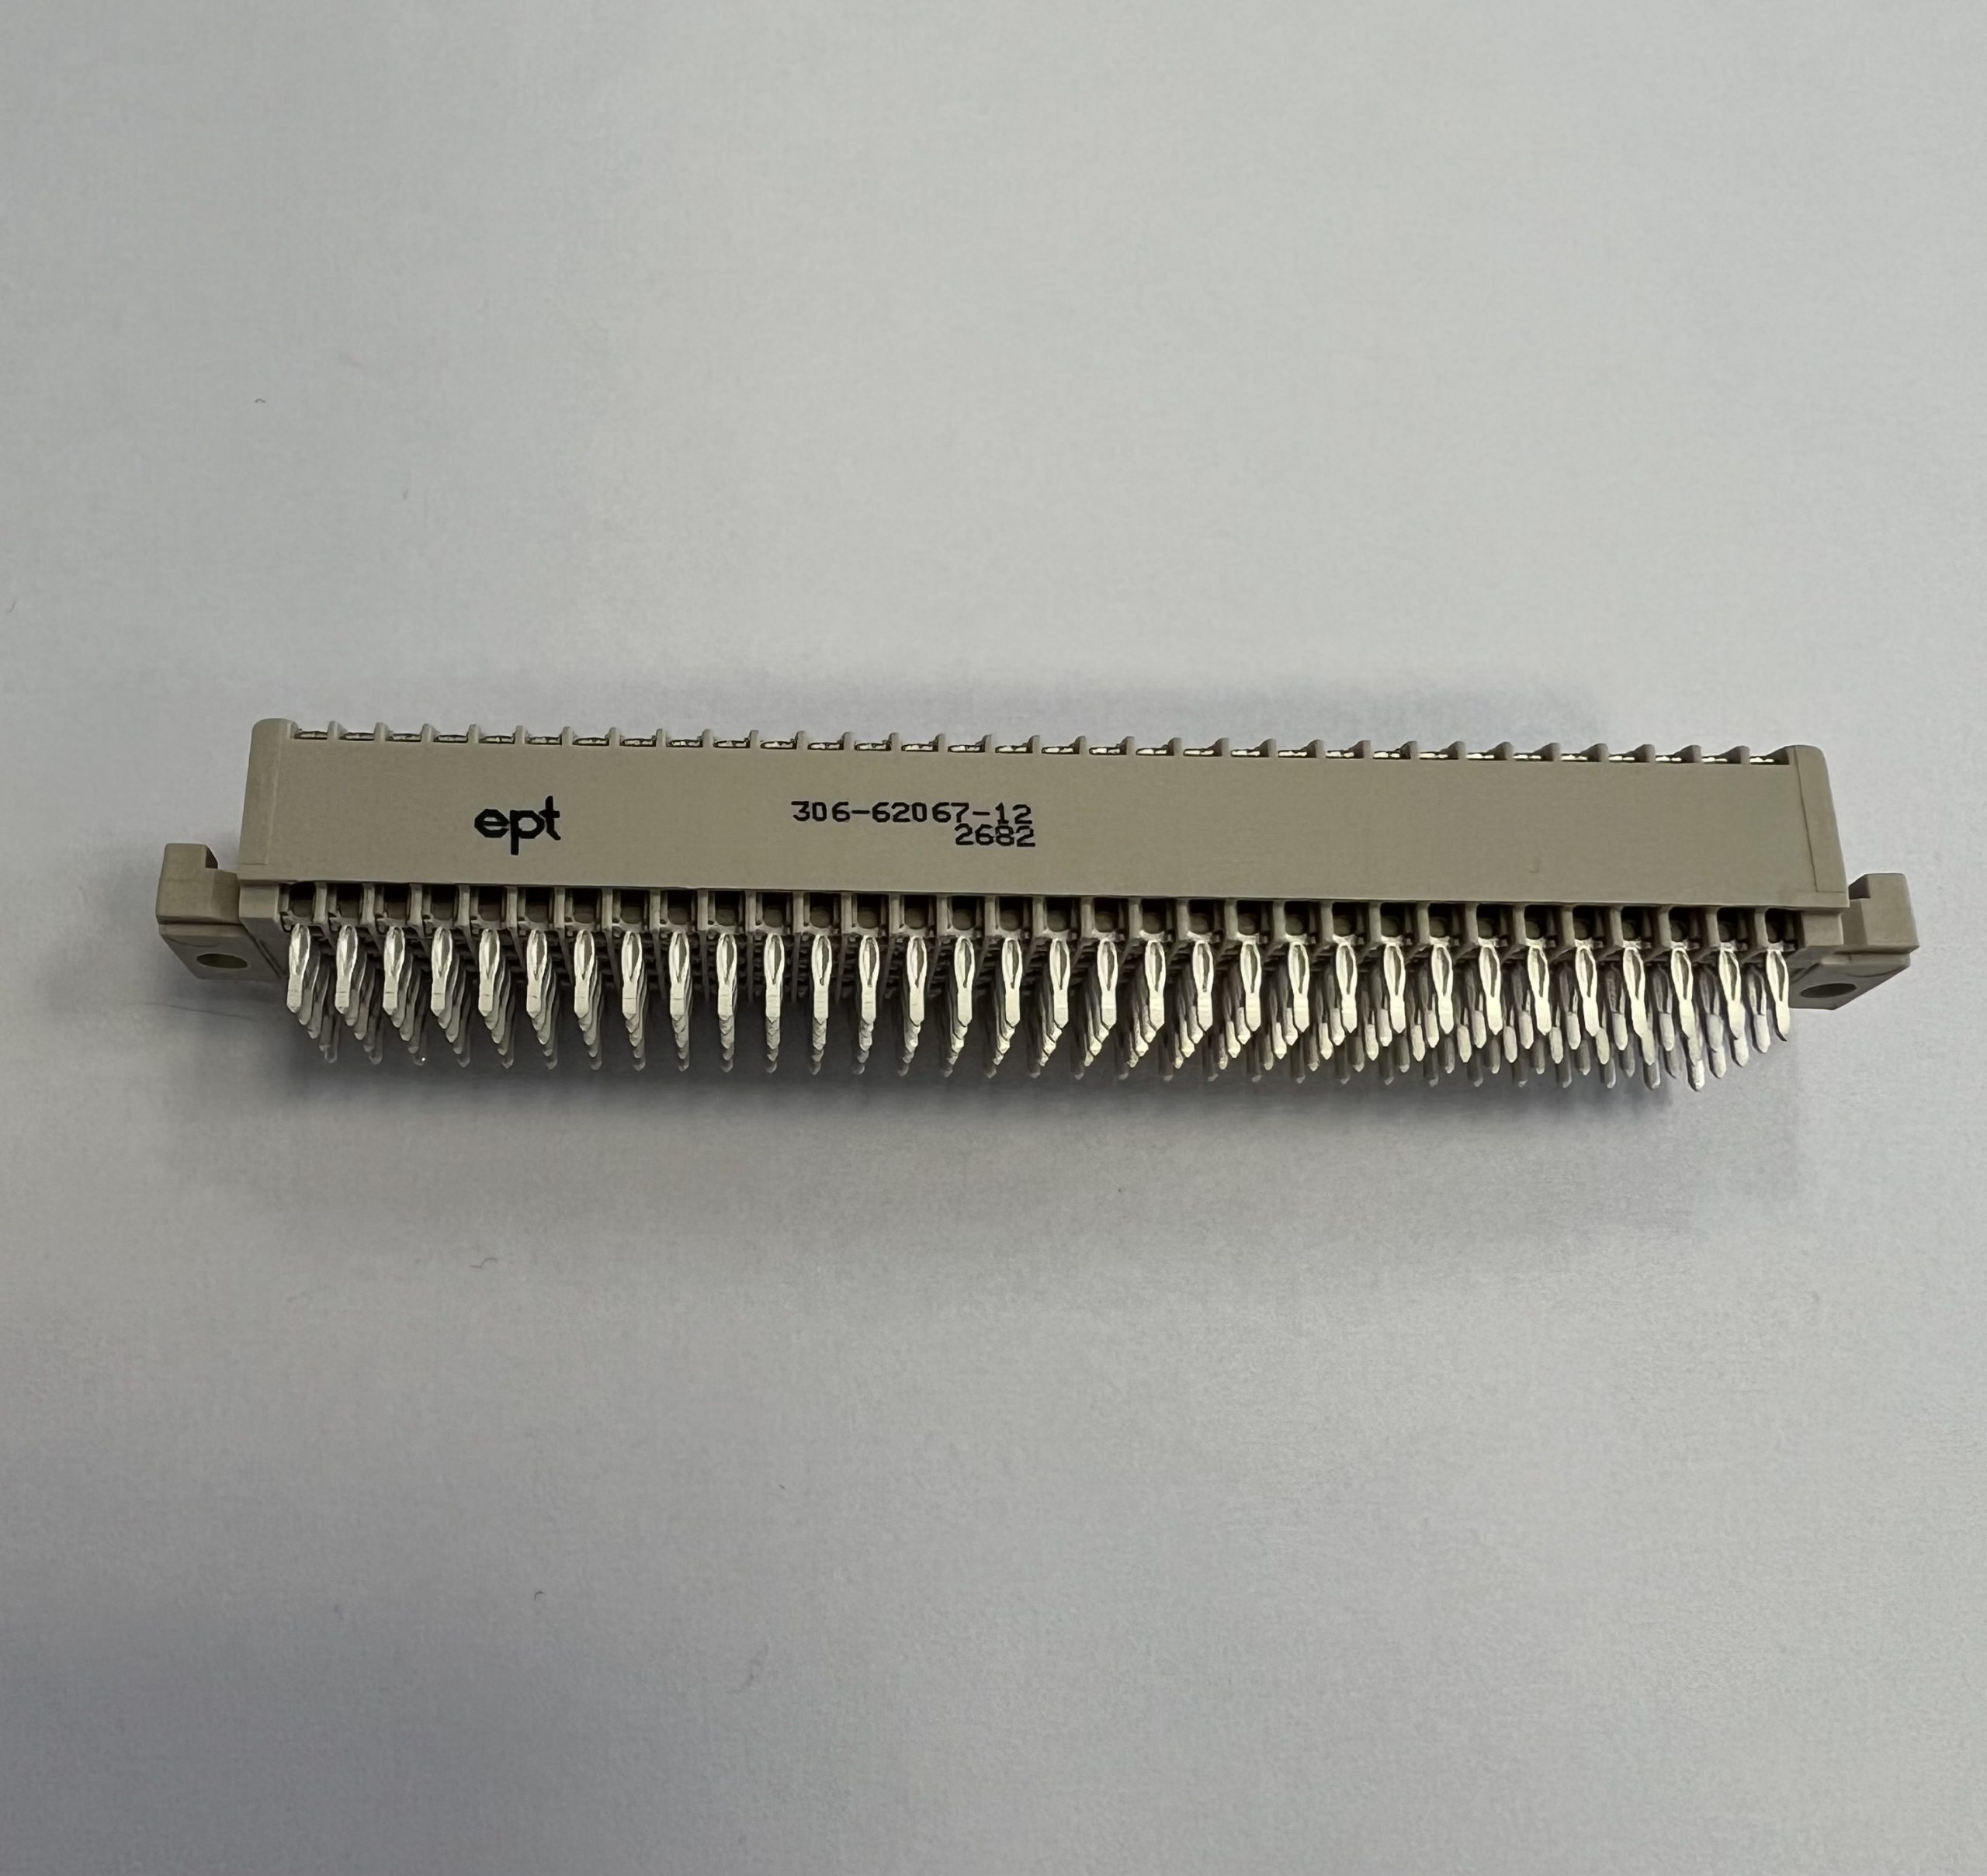 EPT DIN 41612 VME 64x Female Connector